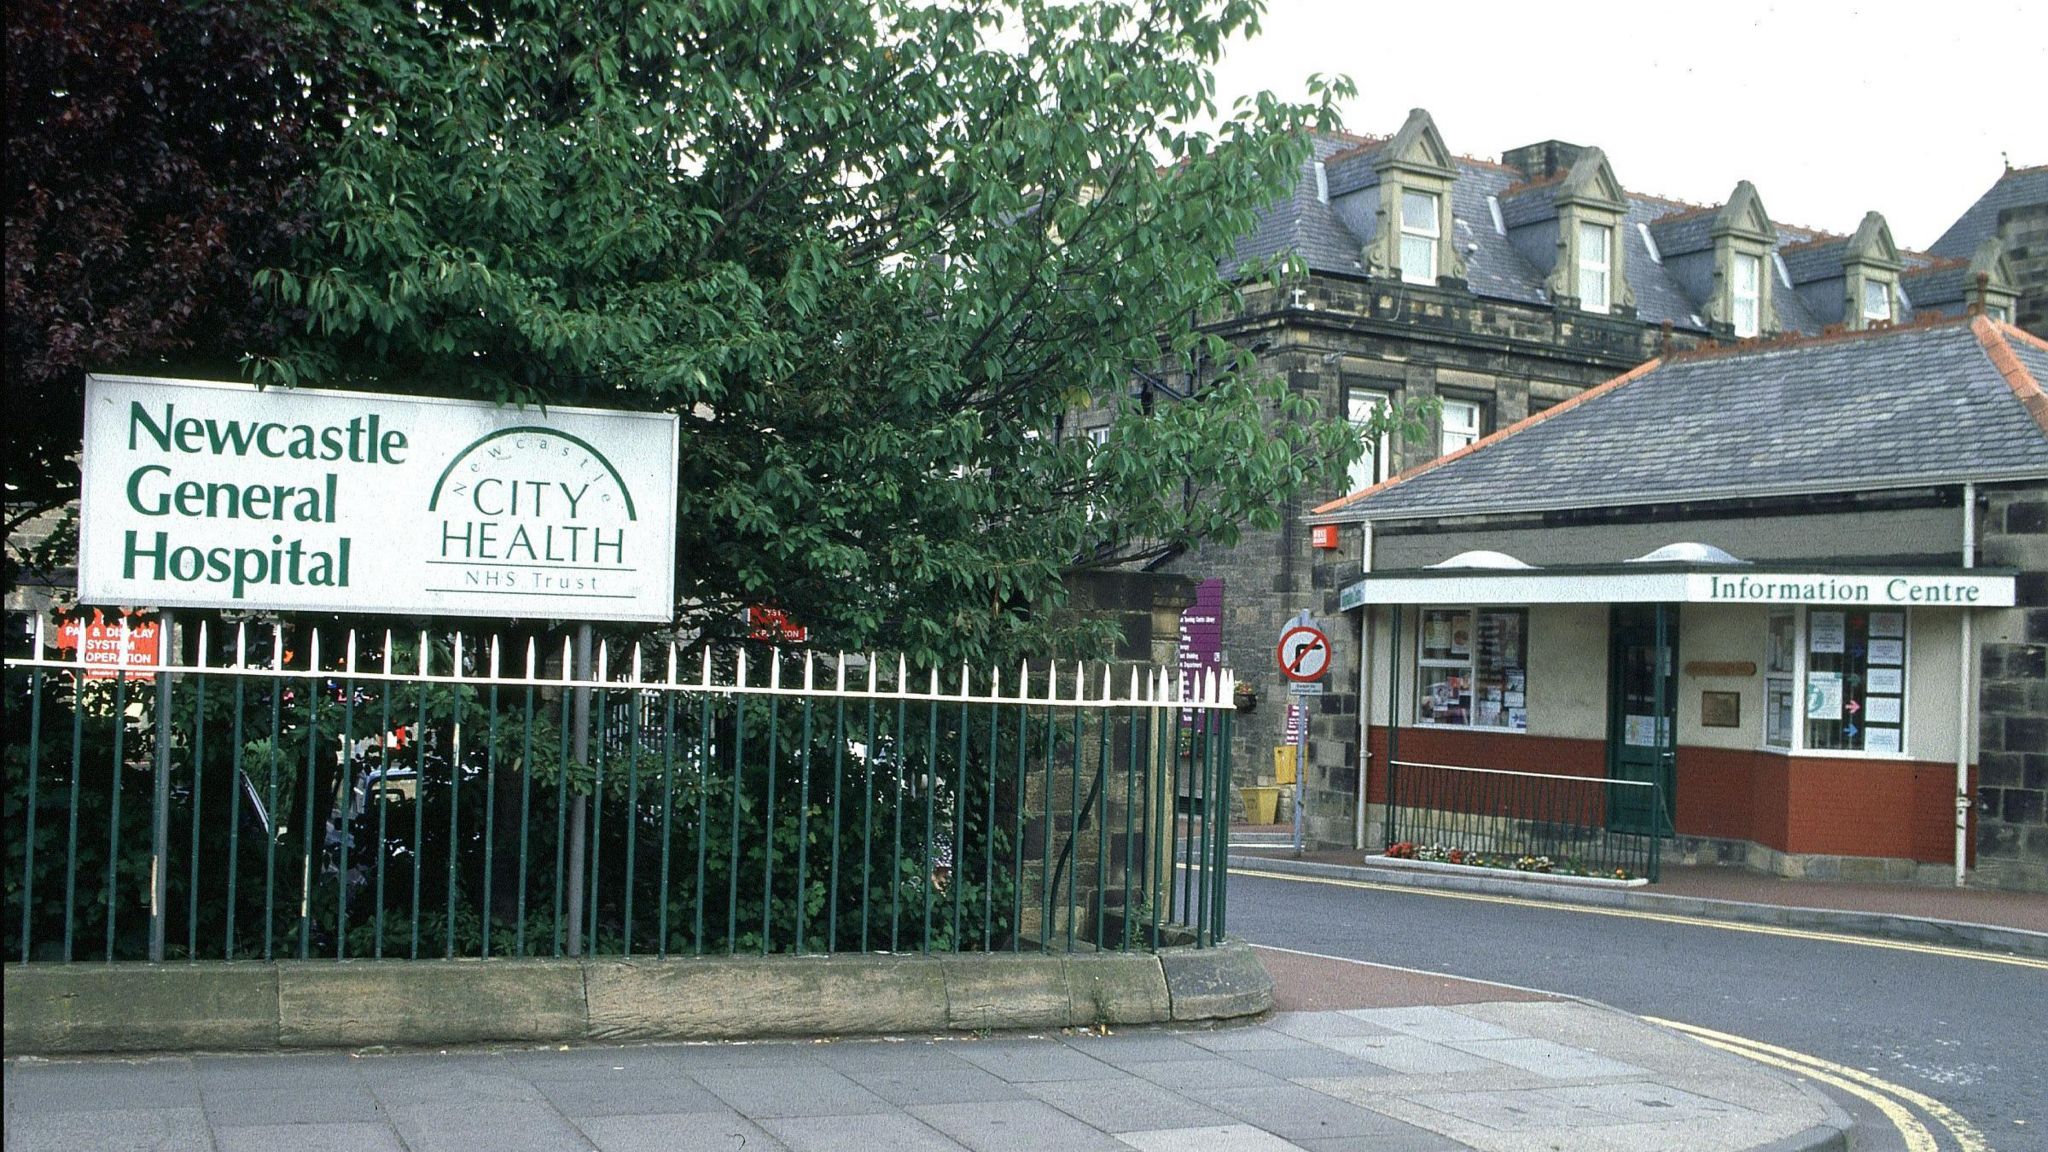 Newcastle General Hospital as it looked in 1998